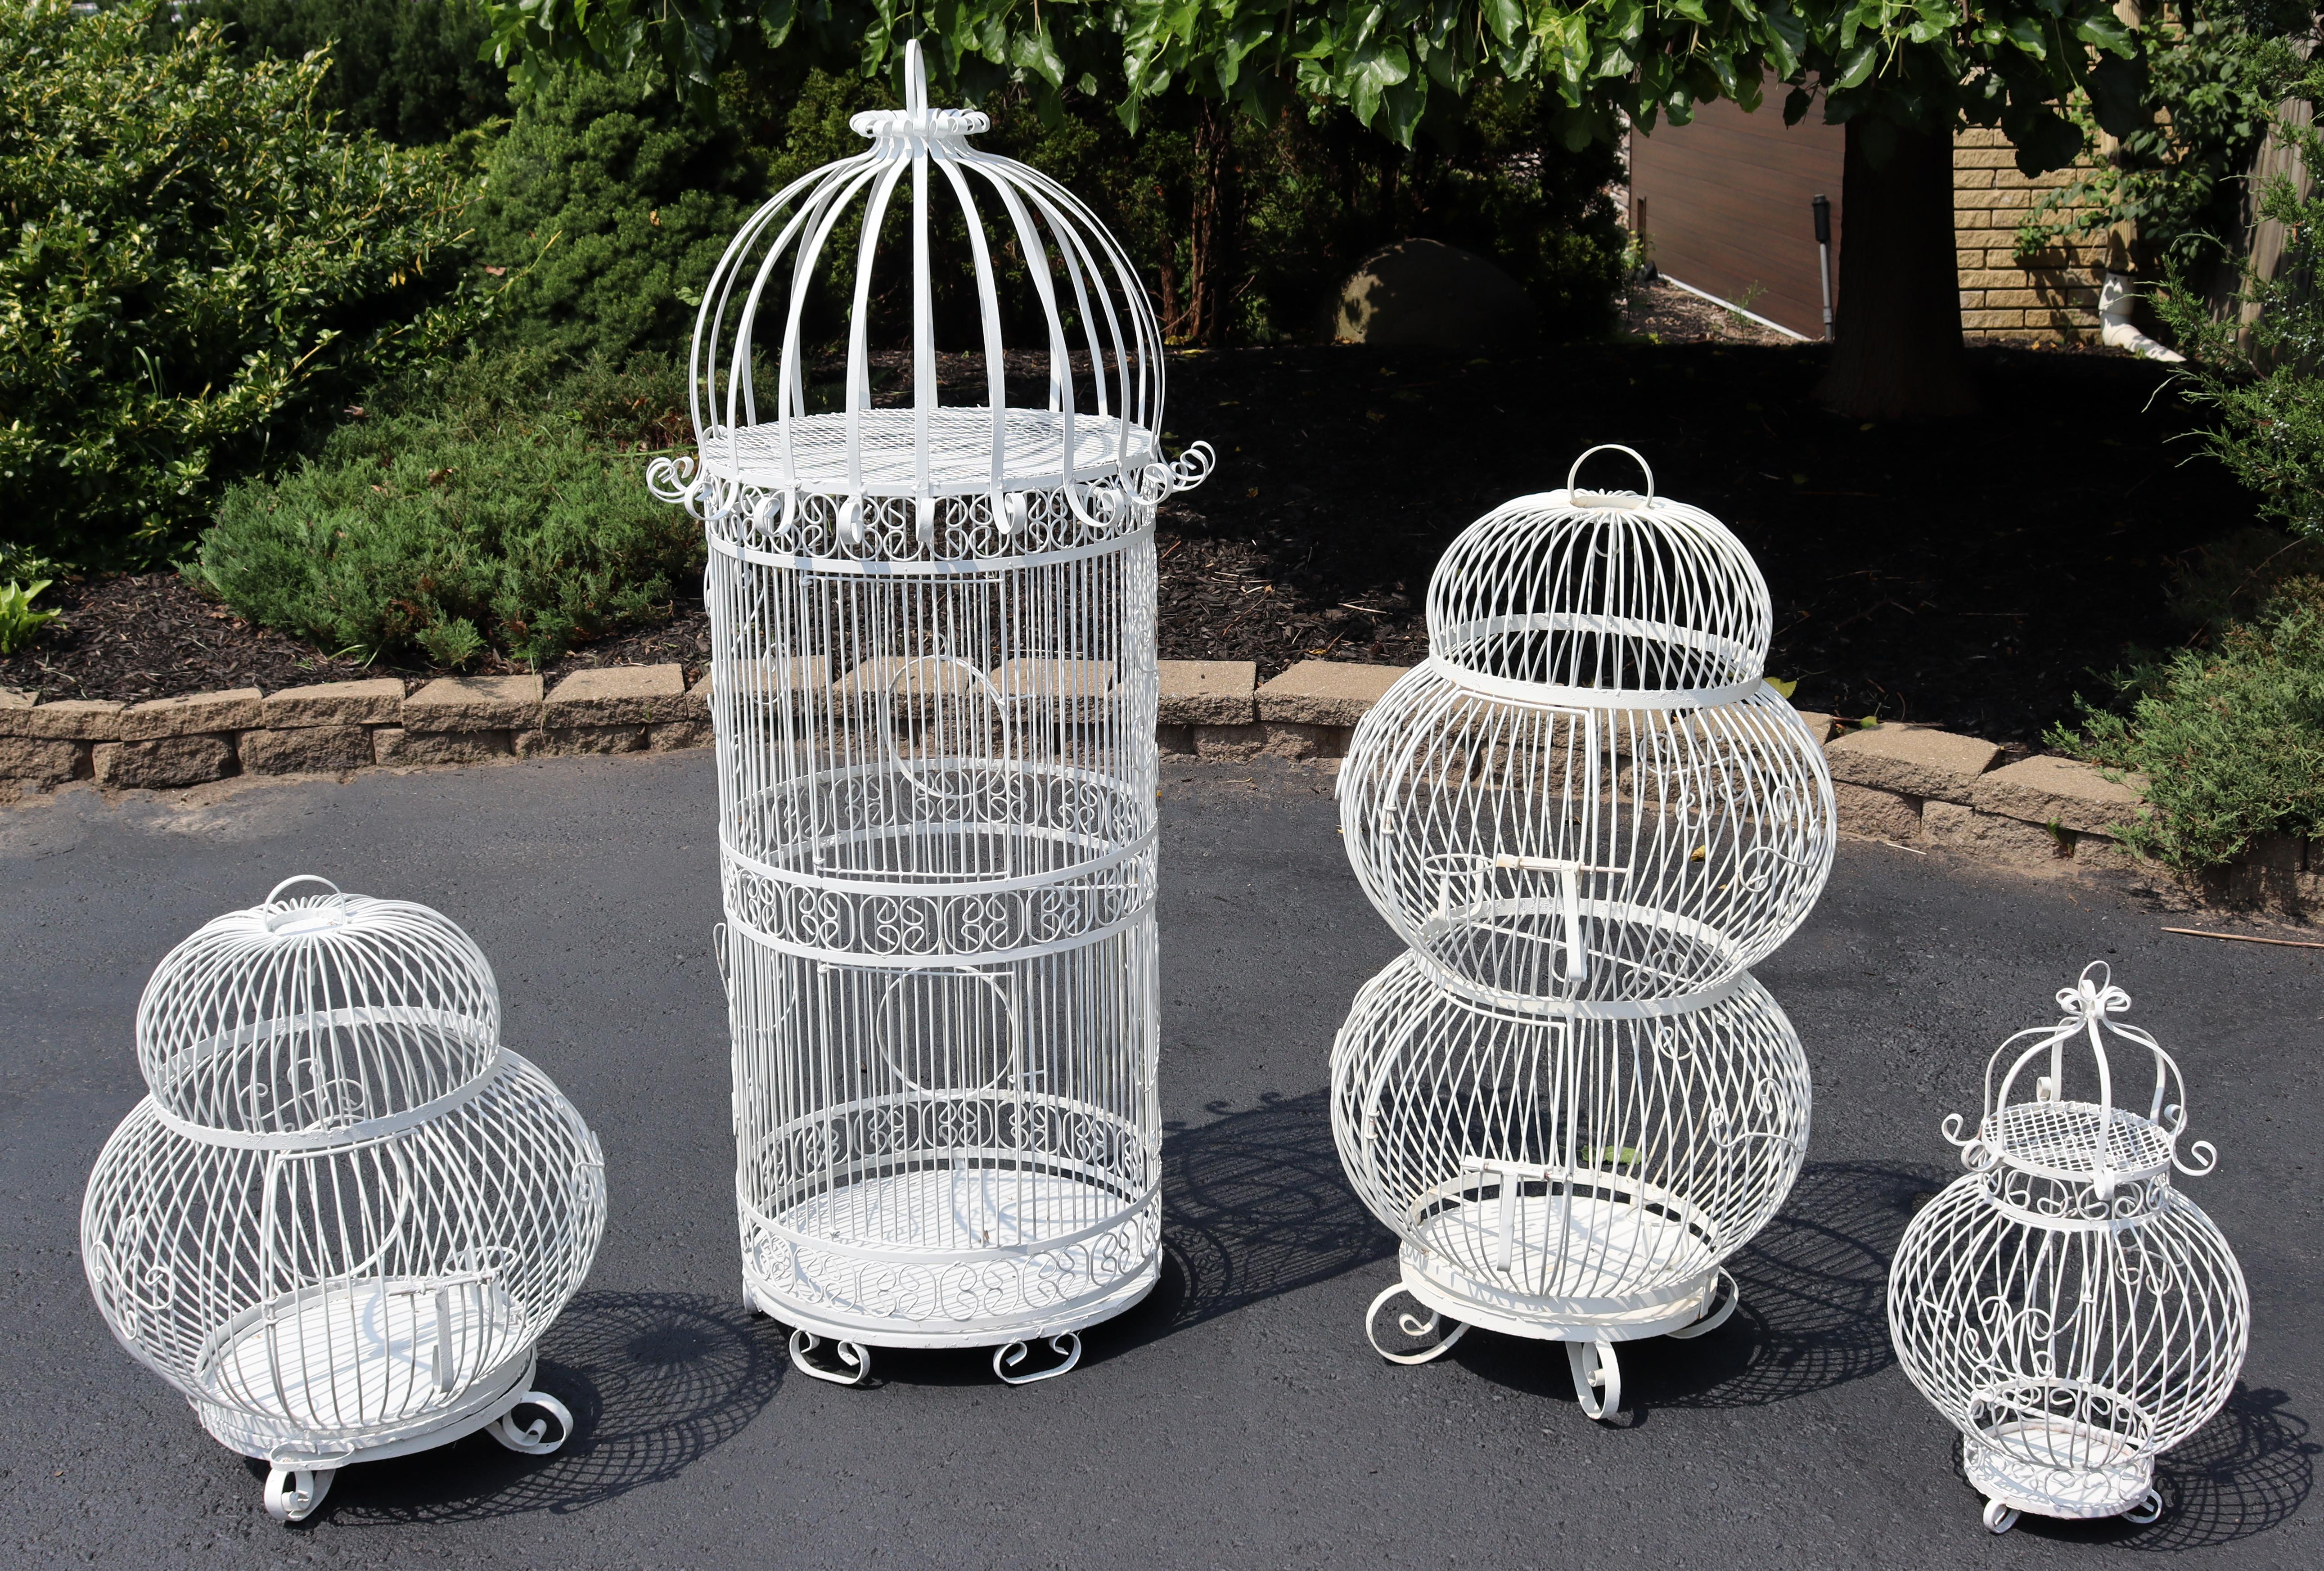 For your consideration is a stupendous, outdoor, twisted wrought iron patio set of four birdcages, by Salterini, circa the 1950s. In very good vintage condition. The dimensions of each are 22